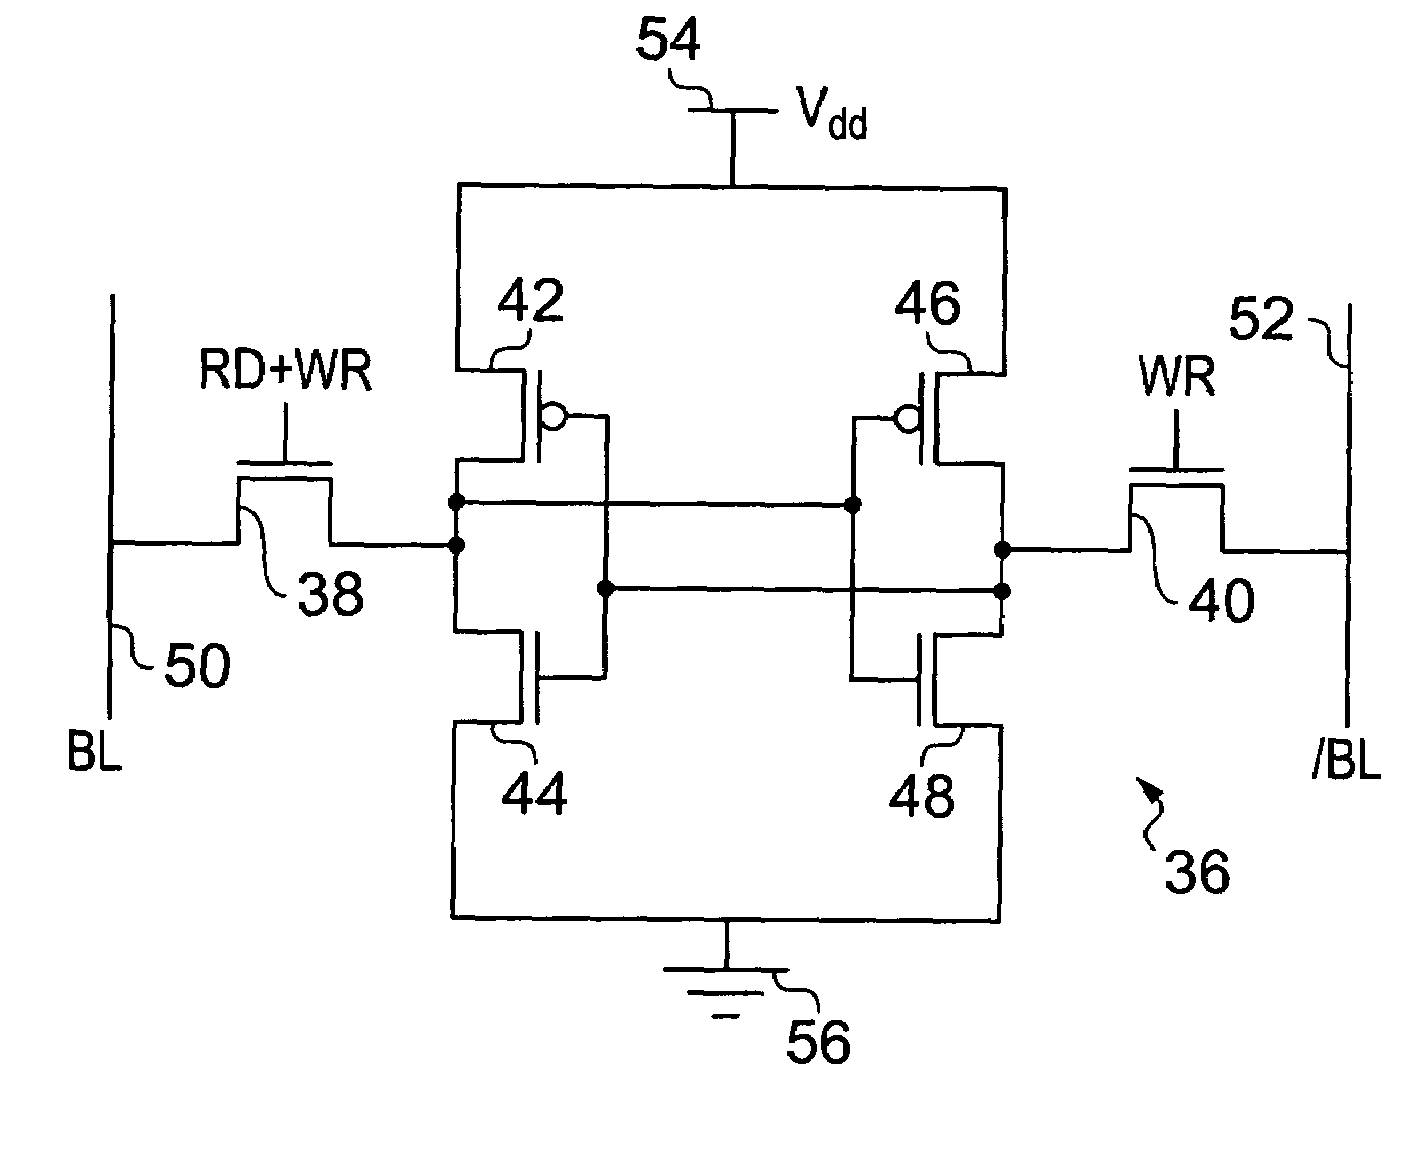 Integrated circuit memory access mechanisms